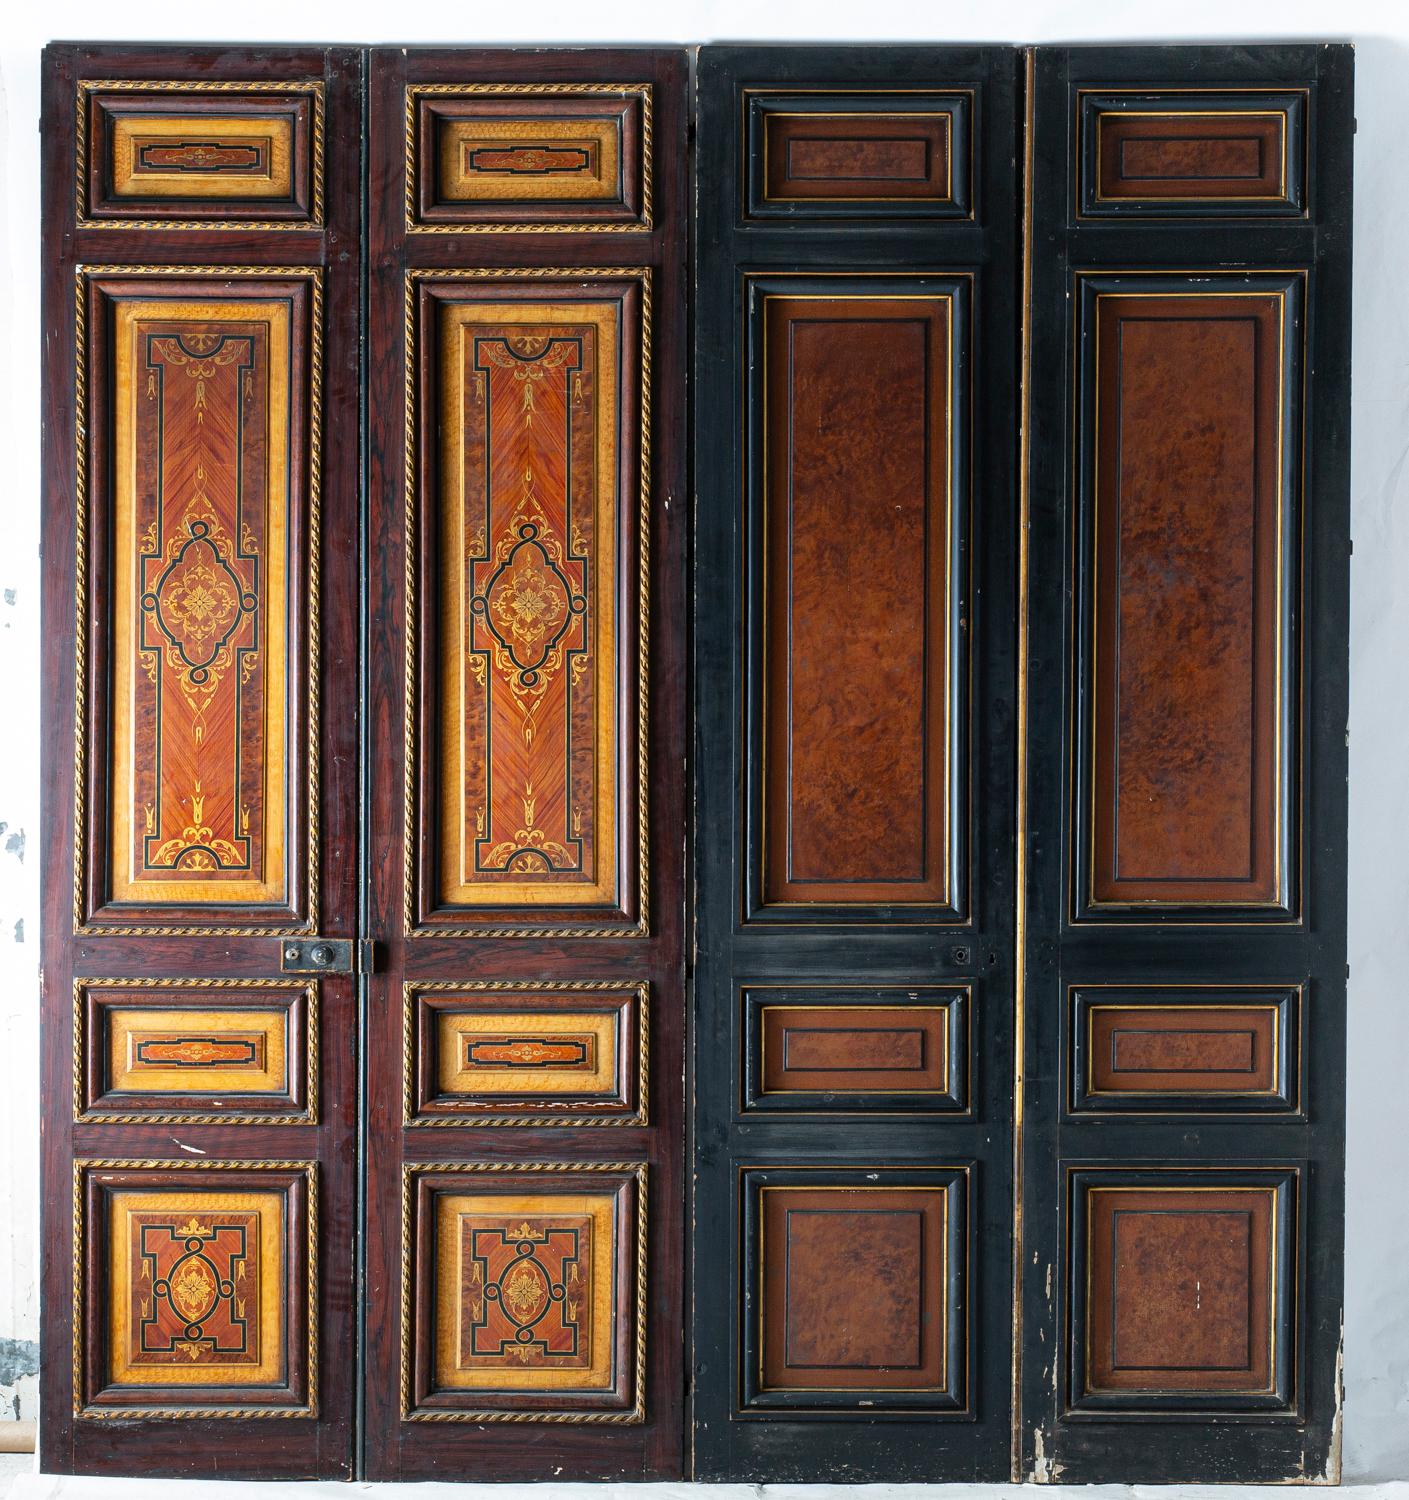 Three pairs of double doors in solid oak, painted in imitation of marquetry (walnut burl, rosewood, sycamore burl). The reserves are surrounded by a gilded wood molding, 
Two of the pairs are double-sided, the third pair has one side painted in